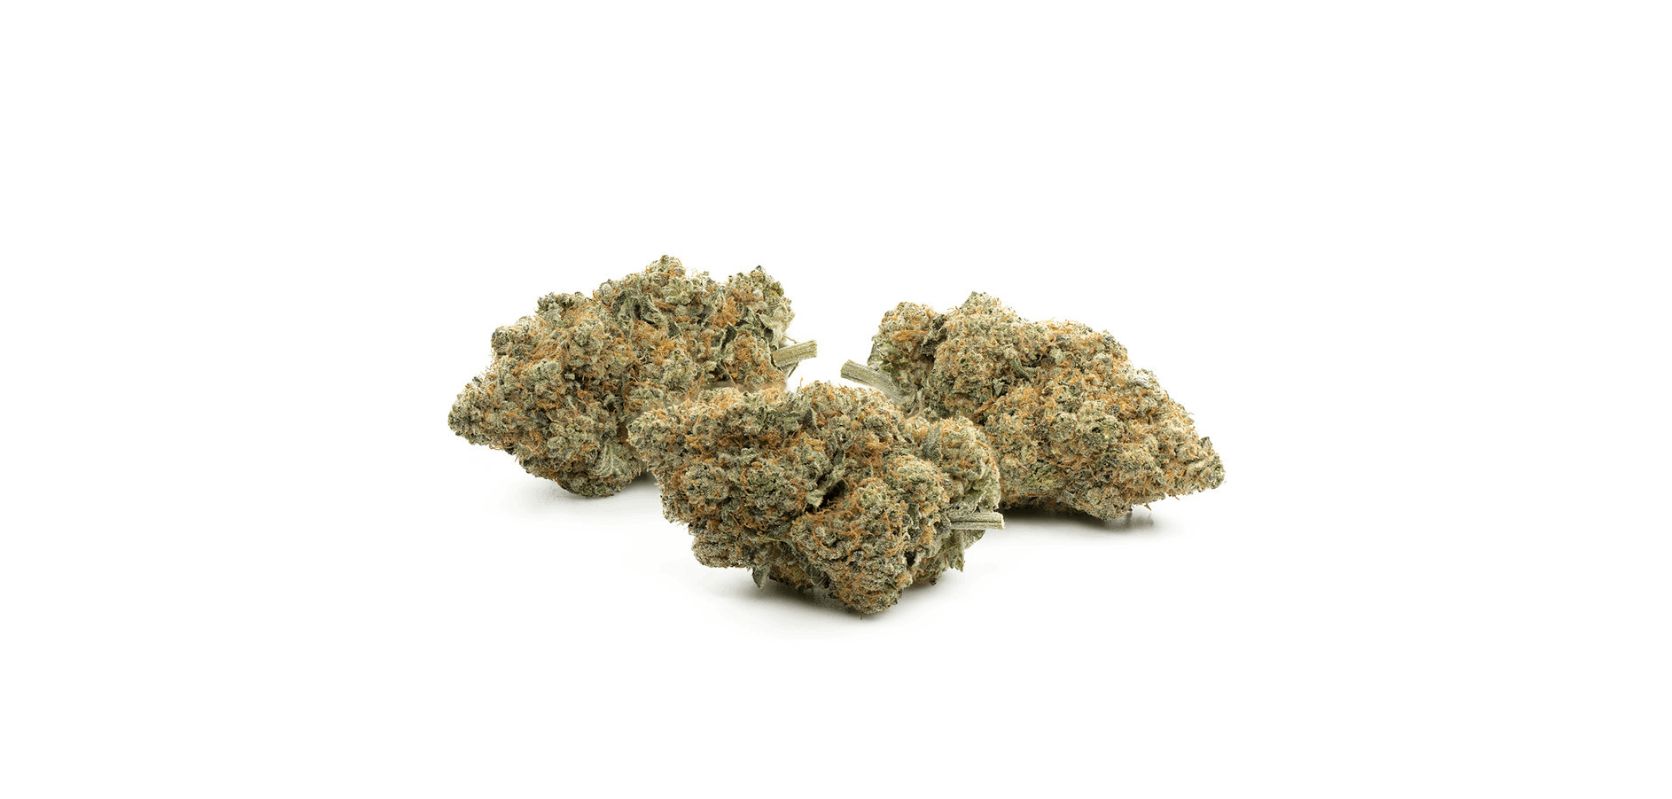 Buy weed online like the Cali Bubba strain, exclusively available at a reputable dispensary. Hurry up and get some budget buds today before they’re all gone!